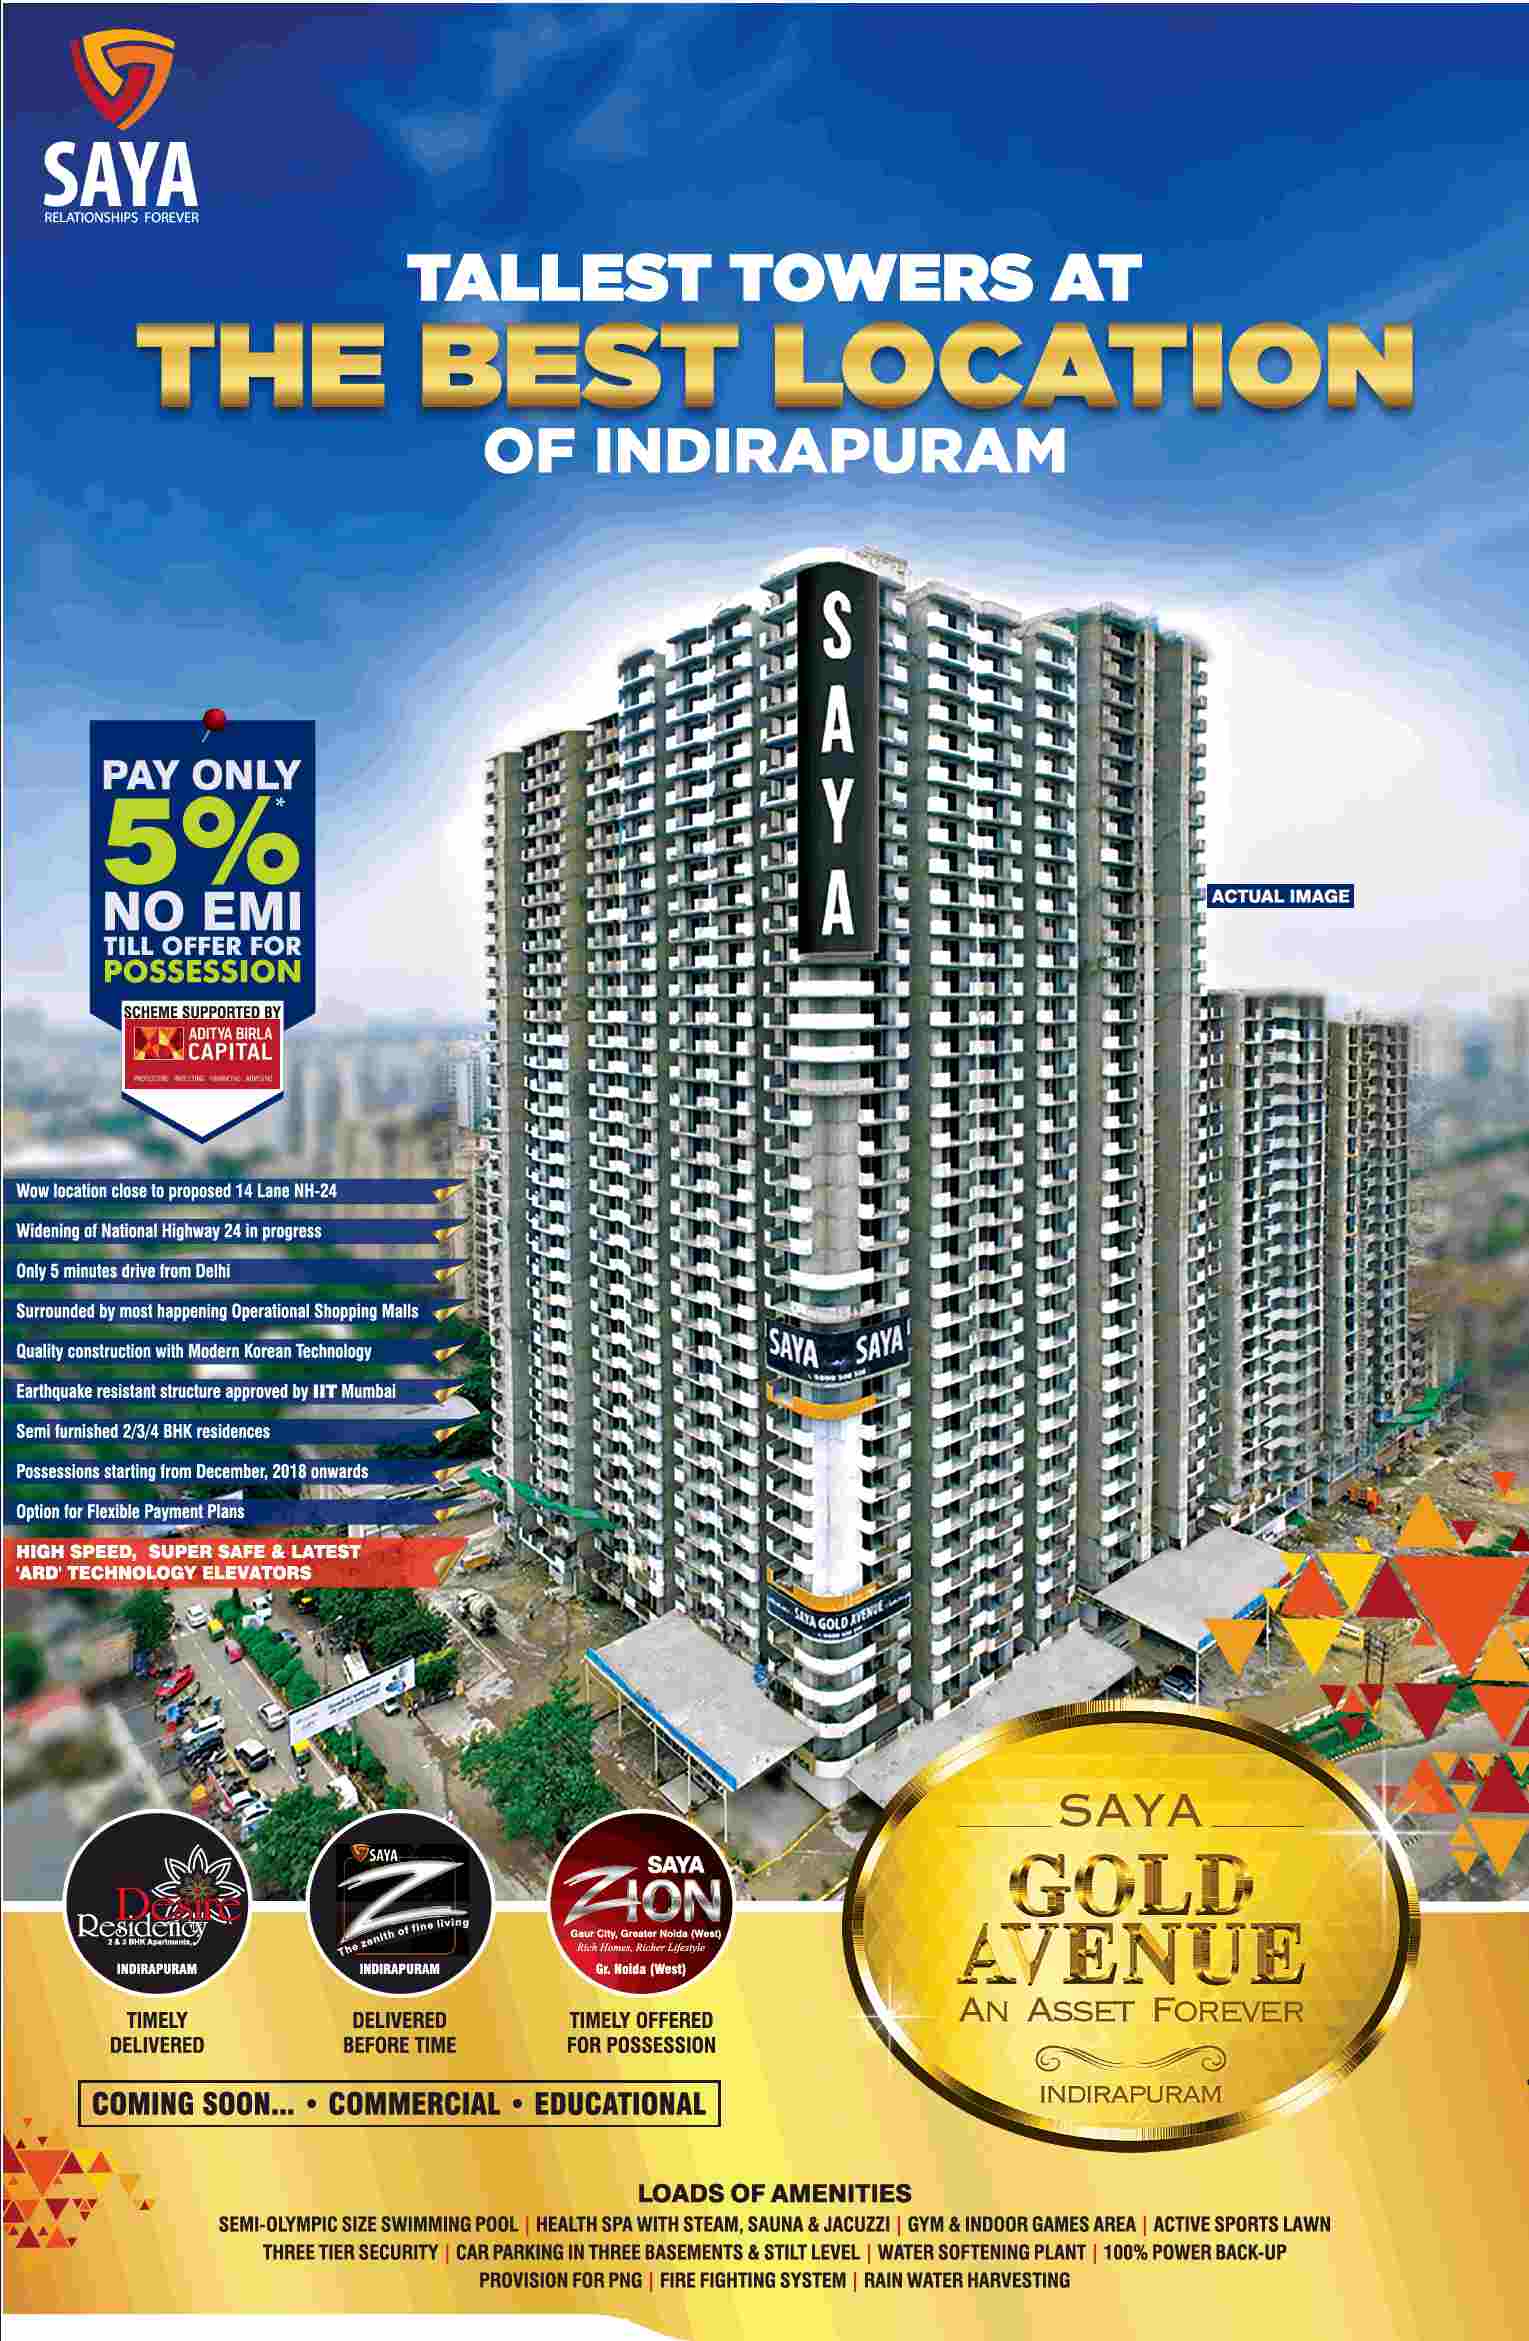 Pay only 5% & no EMI till possession at Saya Gold Avenue in Ghaziabad